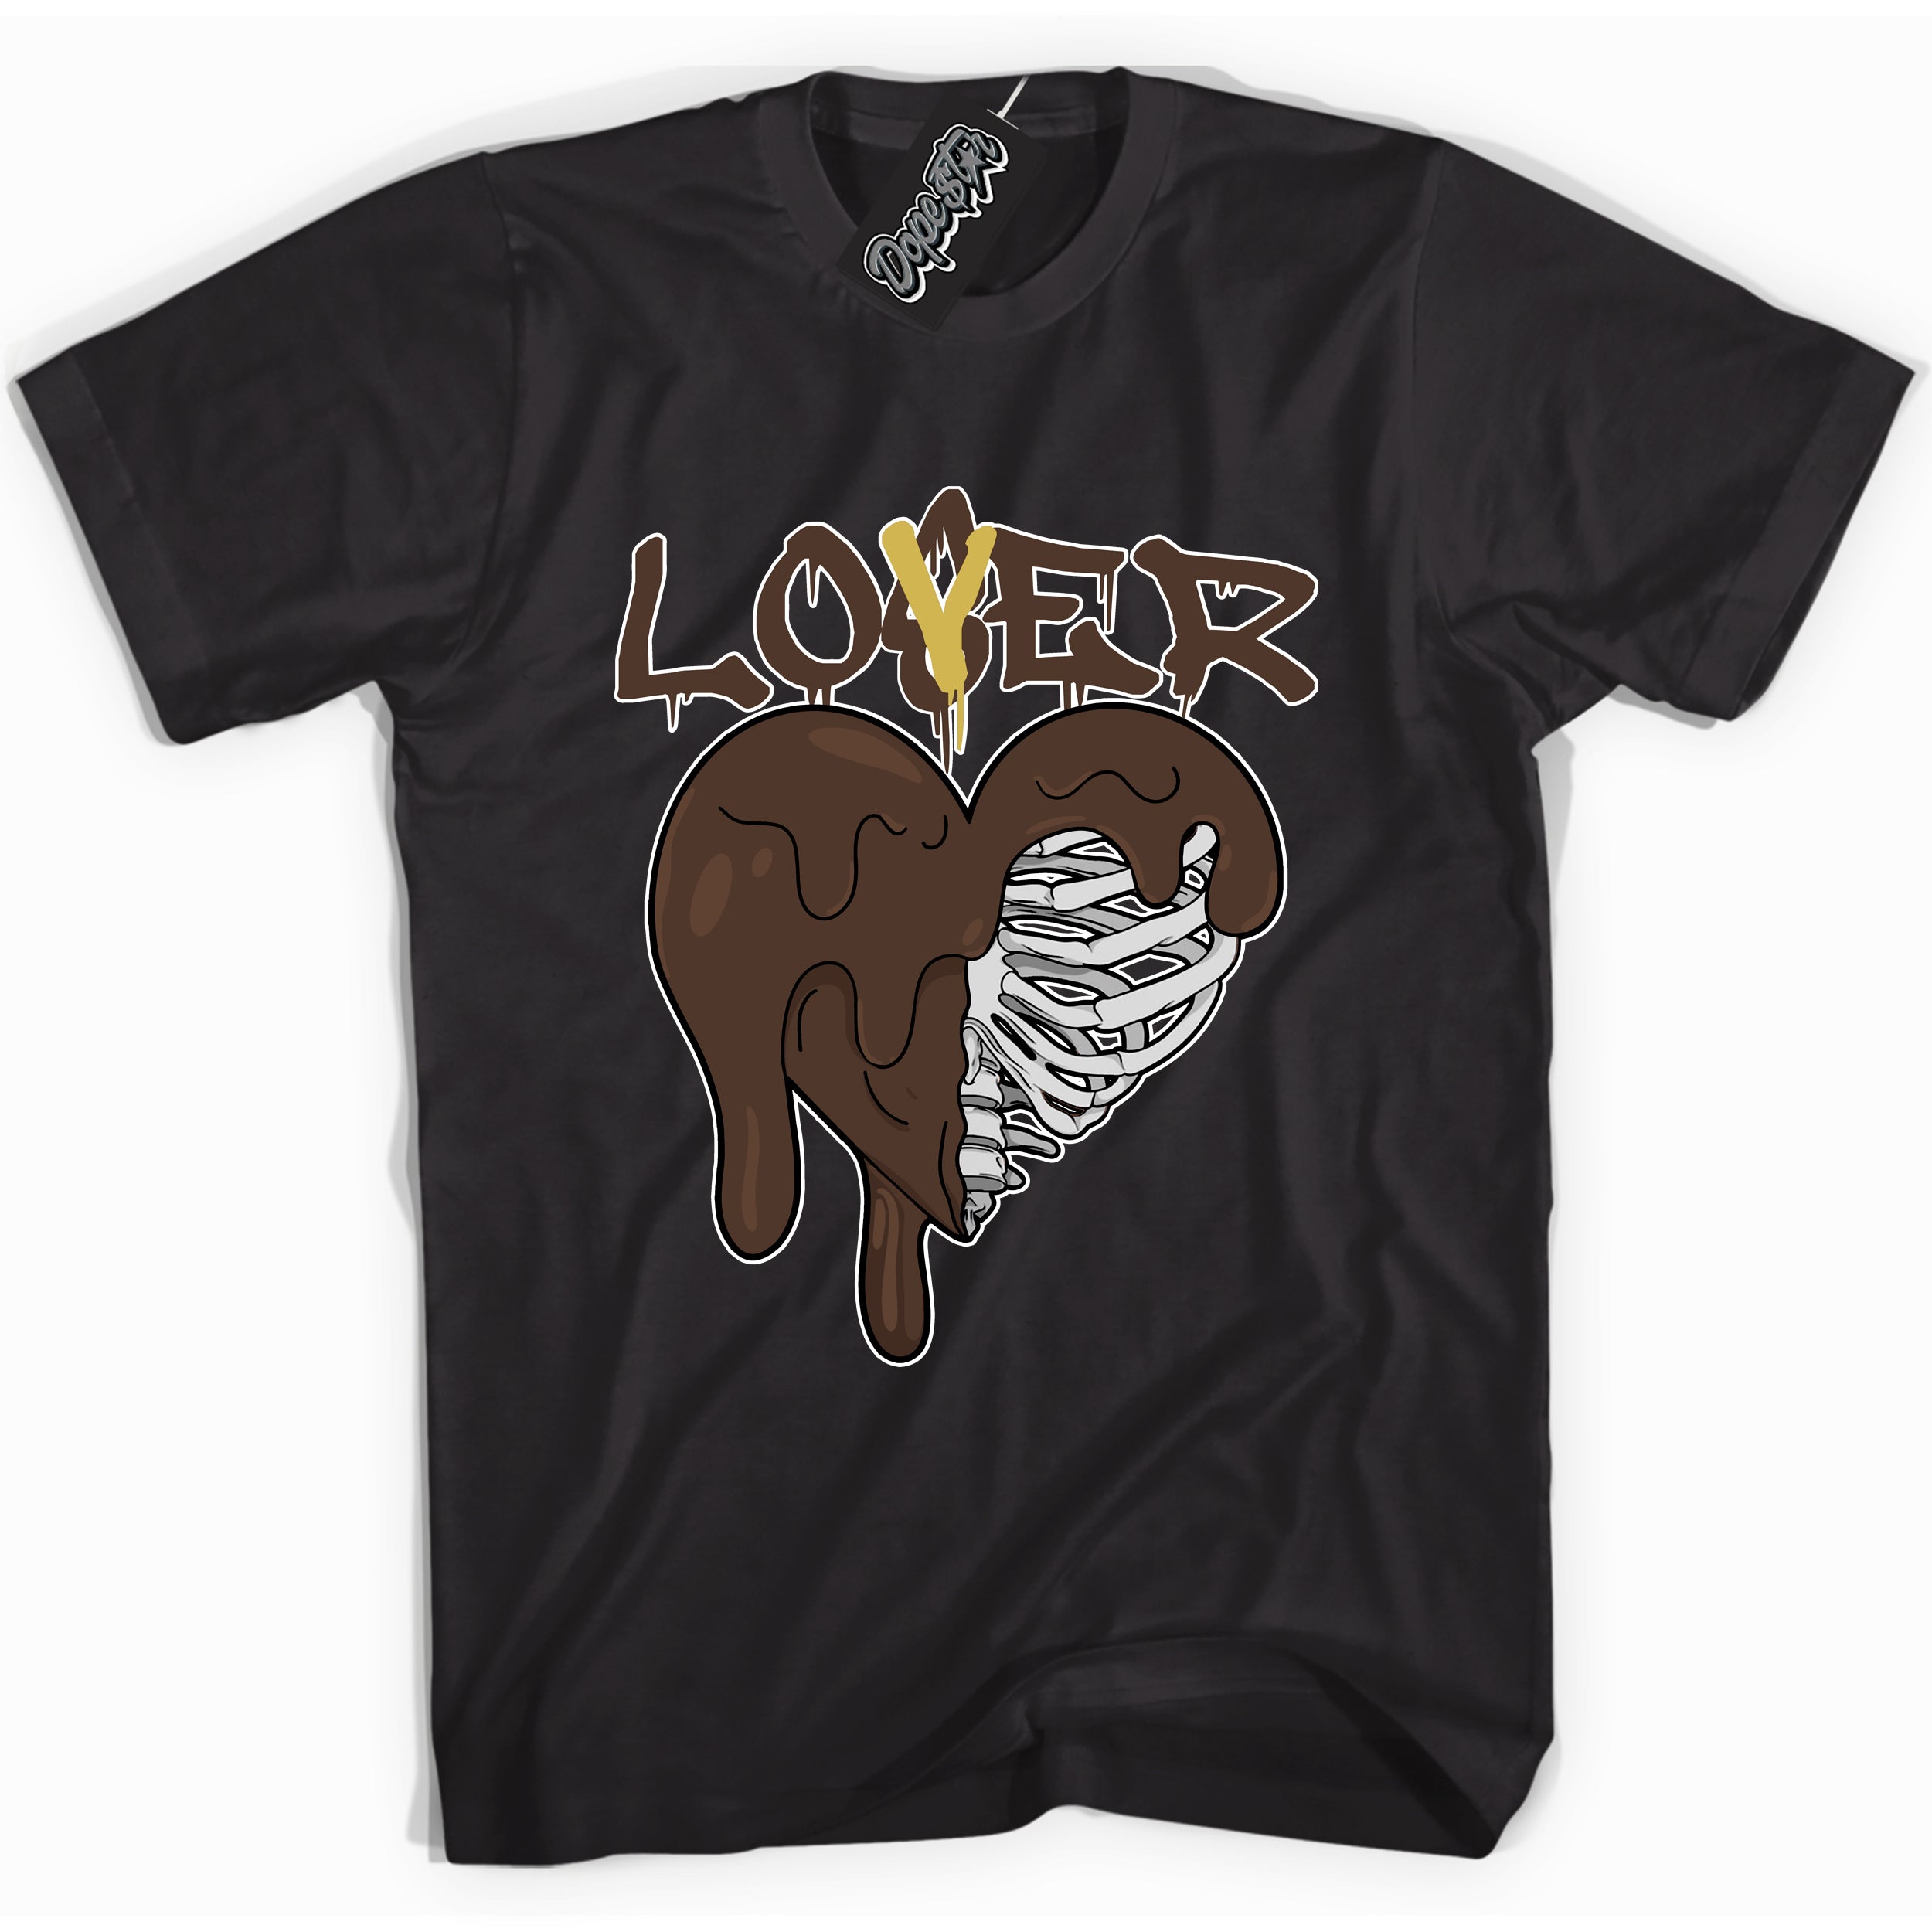 Cool Black graphic tee with “ Lover Loser ” design, that perfectly matches Palomino 1s sneakers 